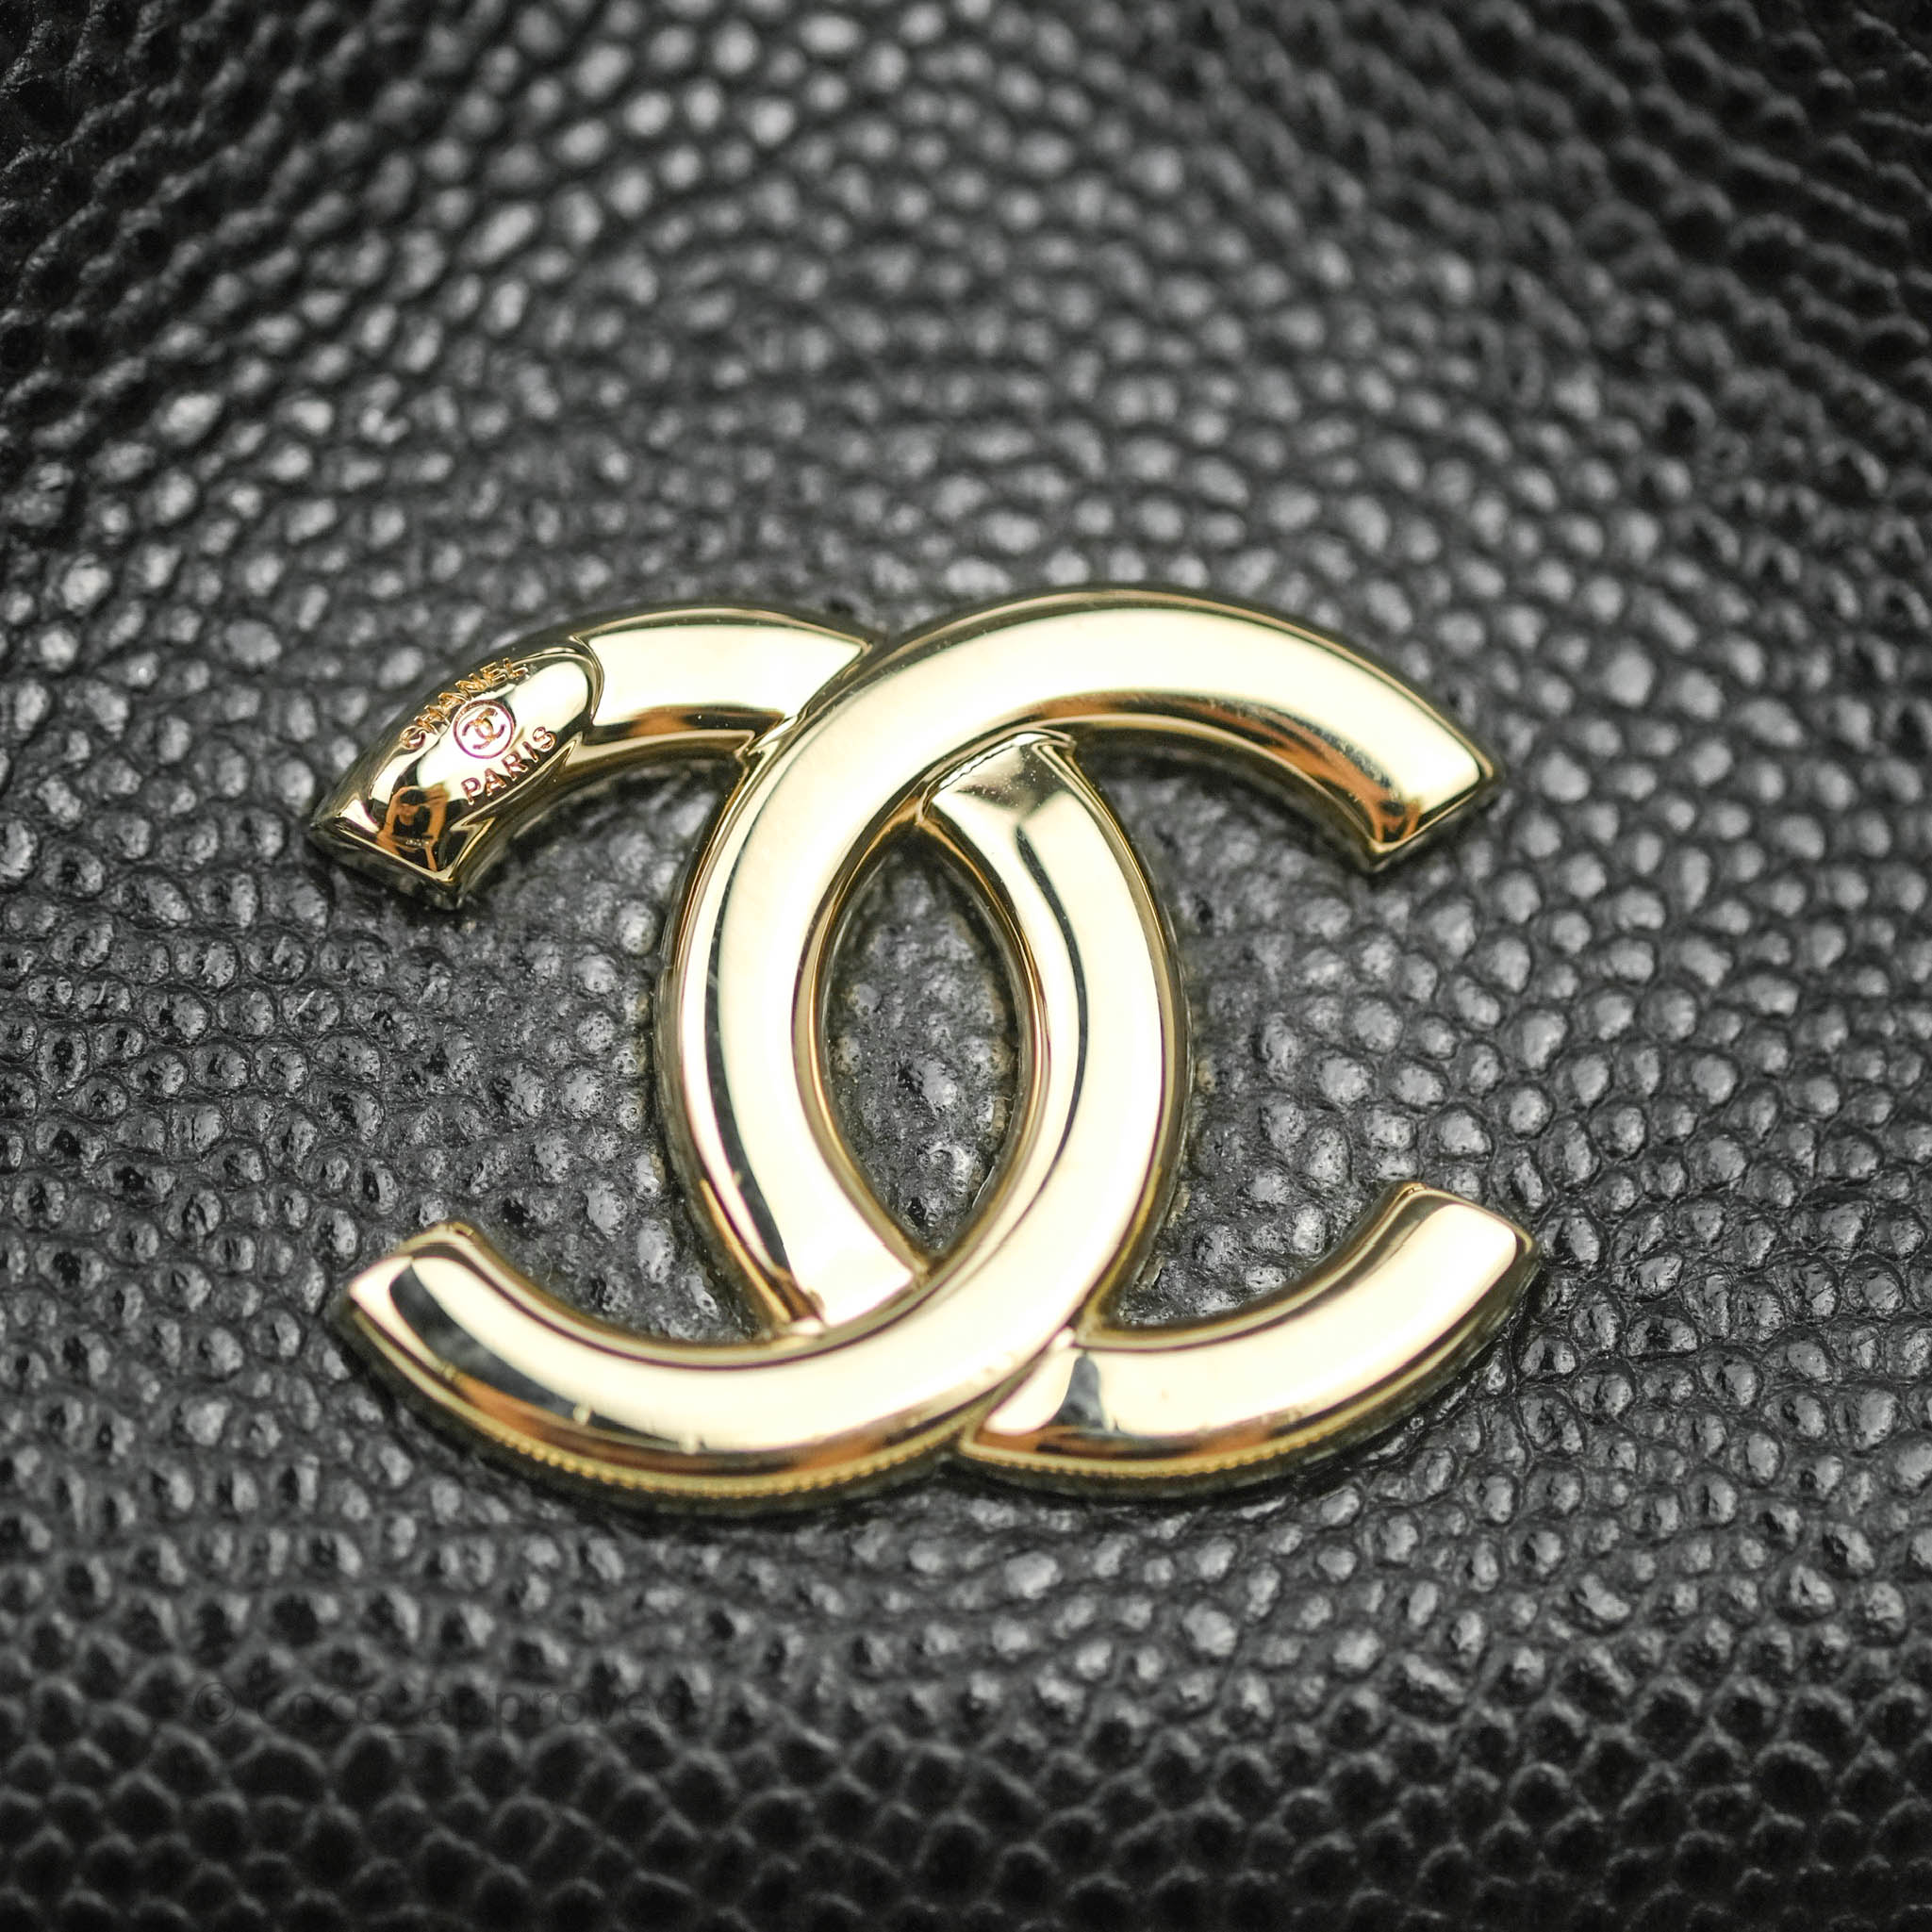 Chanel Black Fur Drawstring Bag with Gold and Silver Hardware